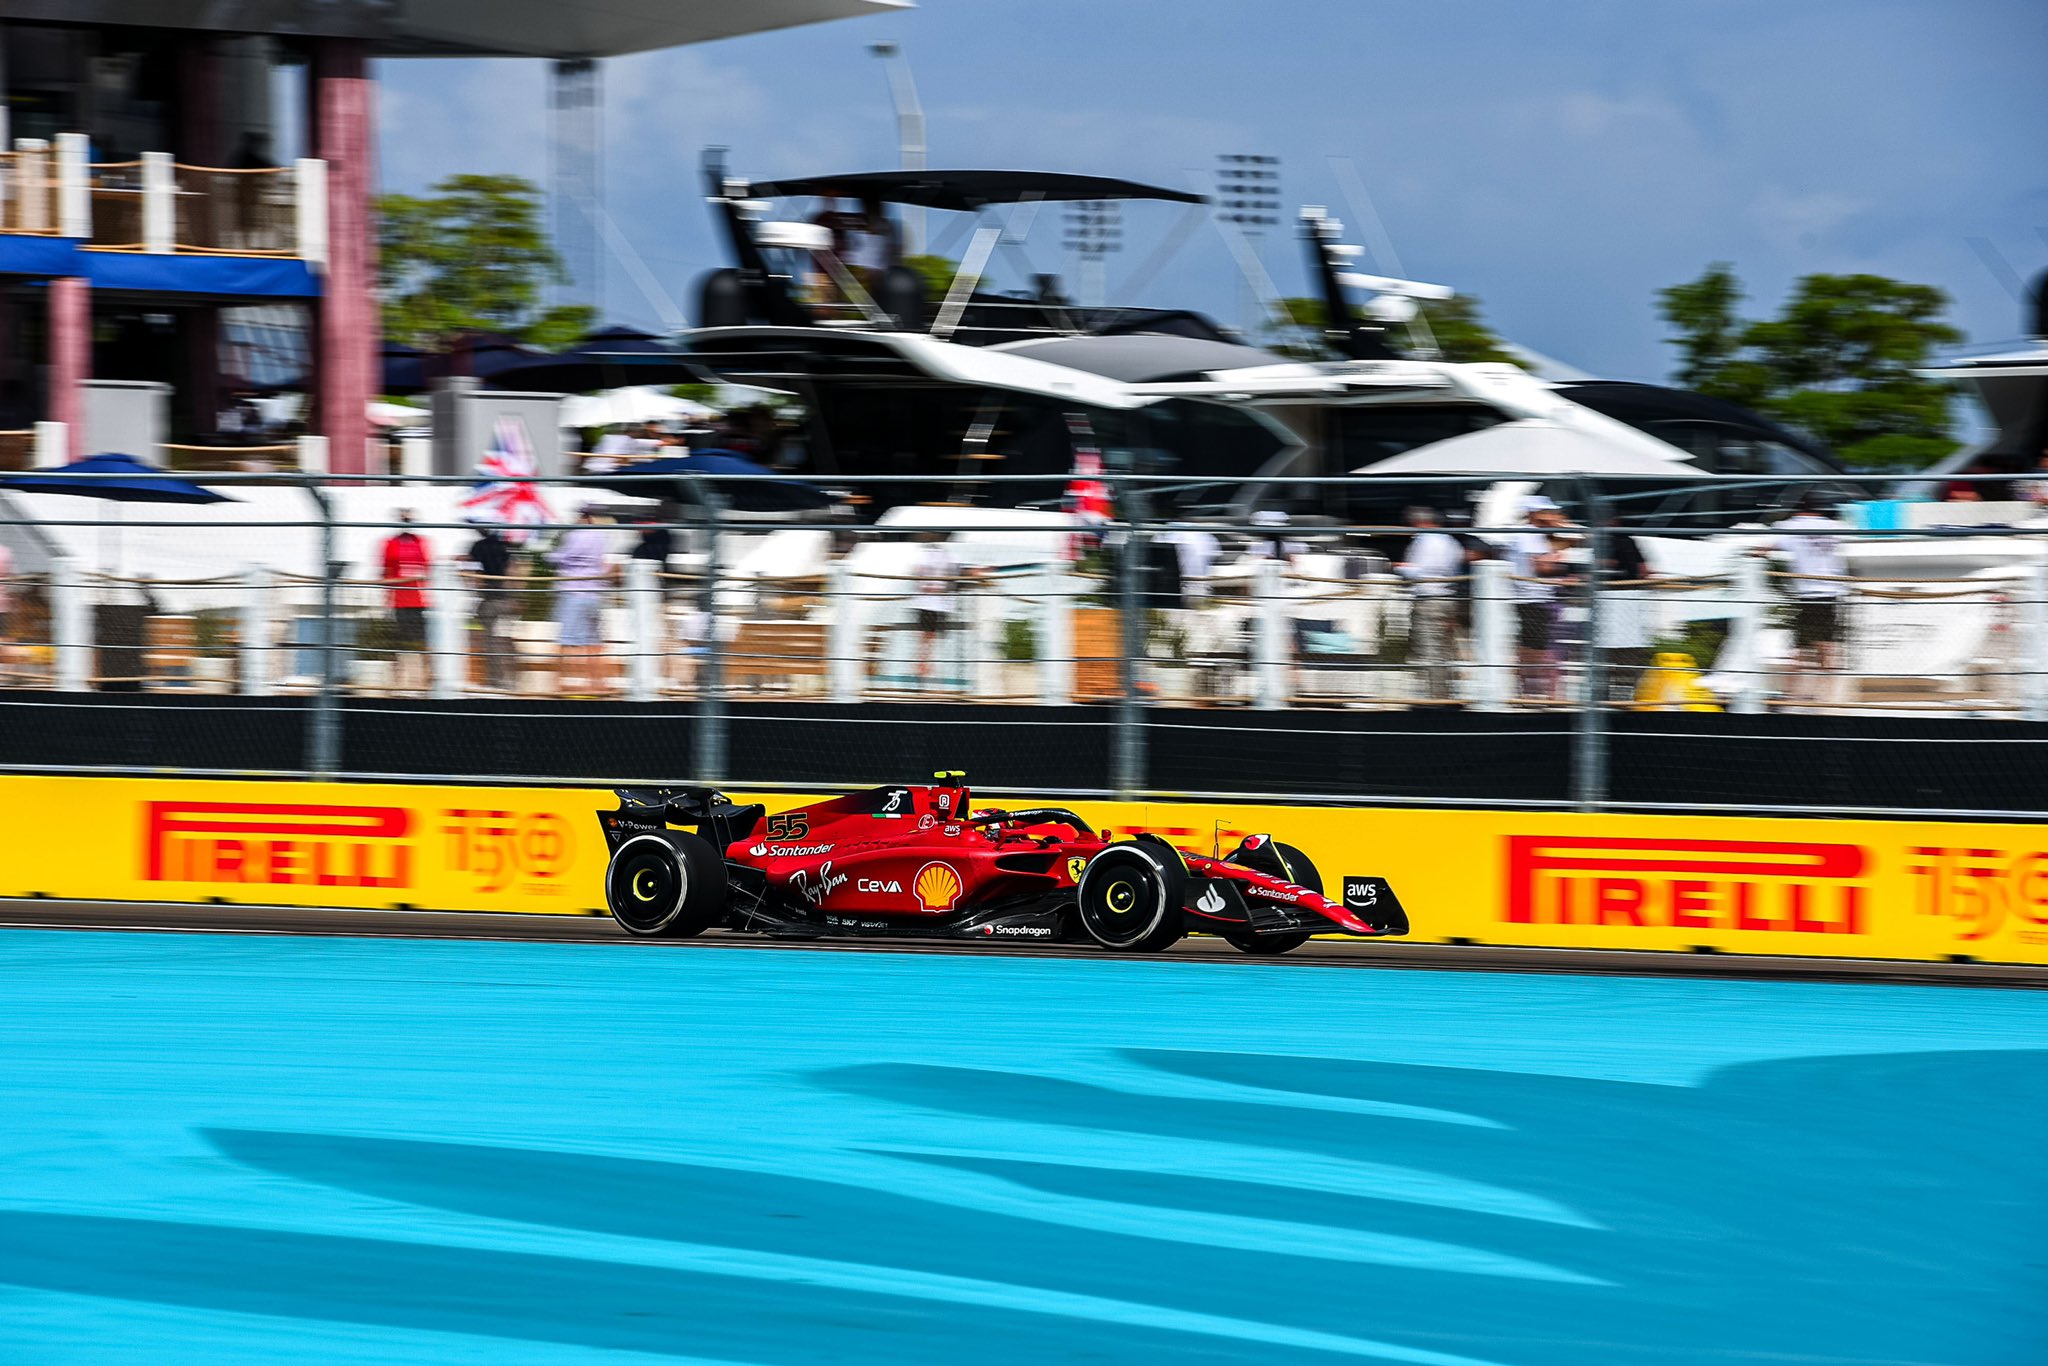 Show your passion for Formula 1 with this Ferrari F1 75 wallpaper 2048x1366